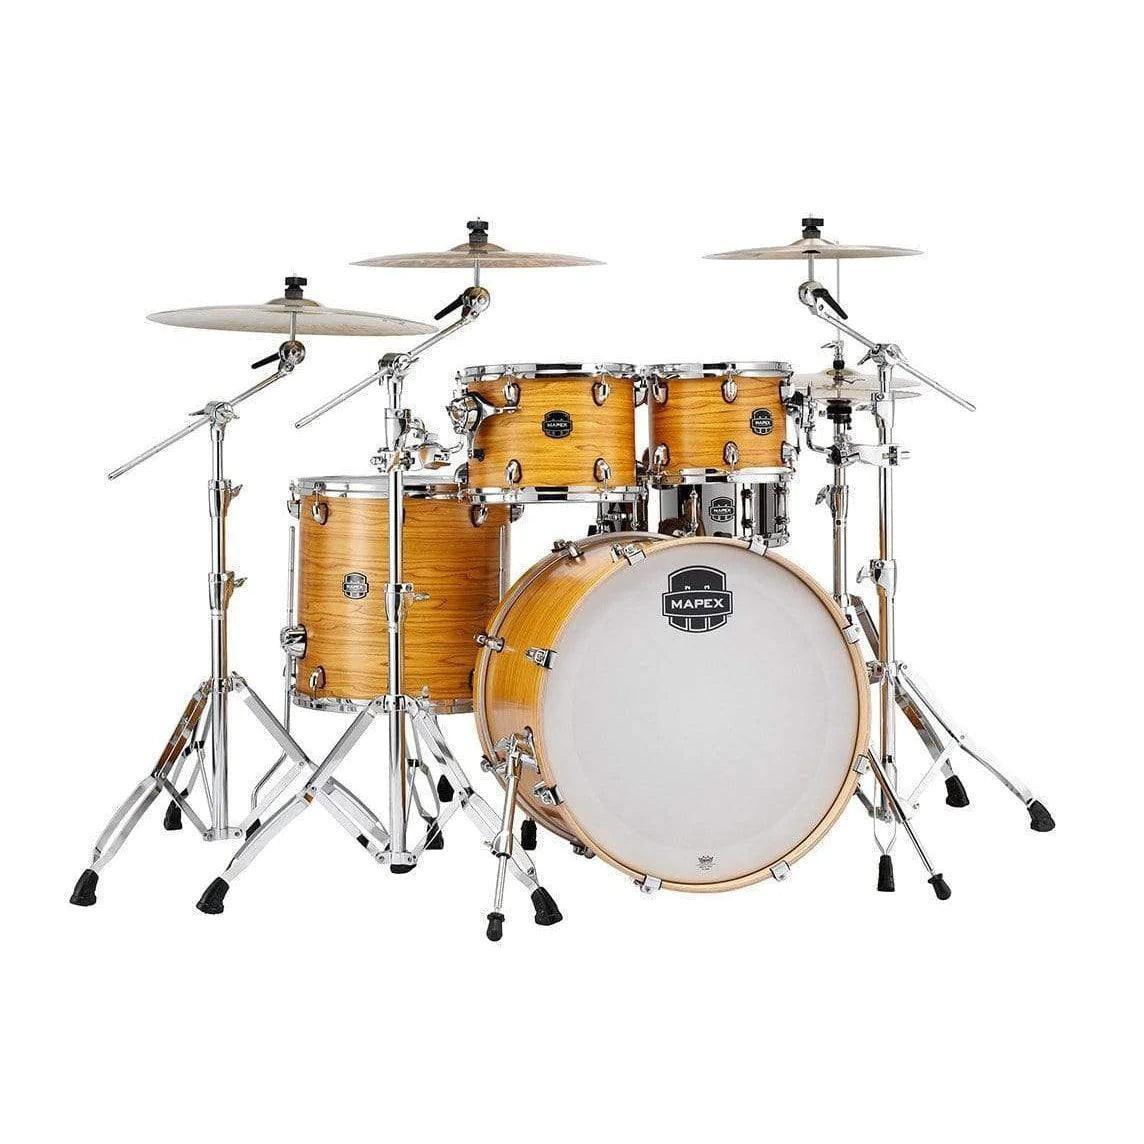 Mapex AR529S Acoustic Drum Kit (Discontinued)